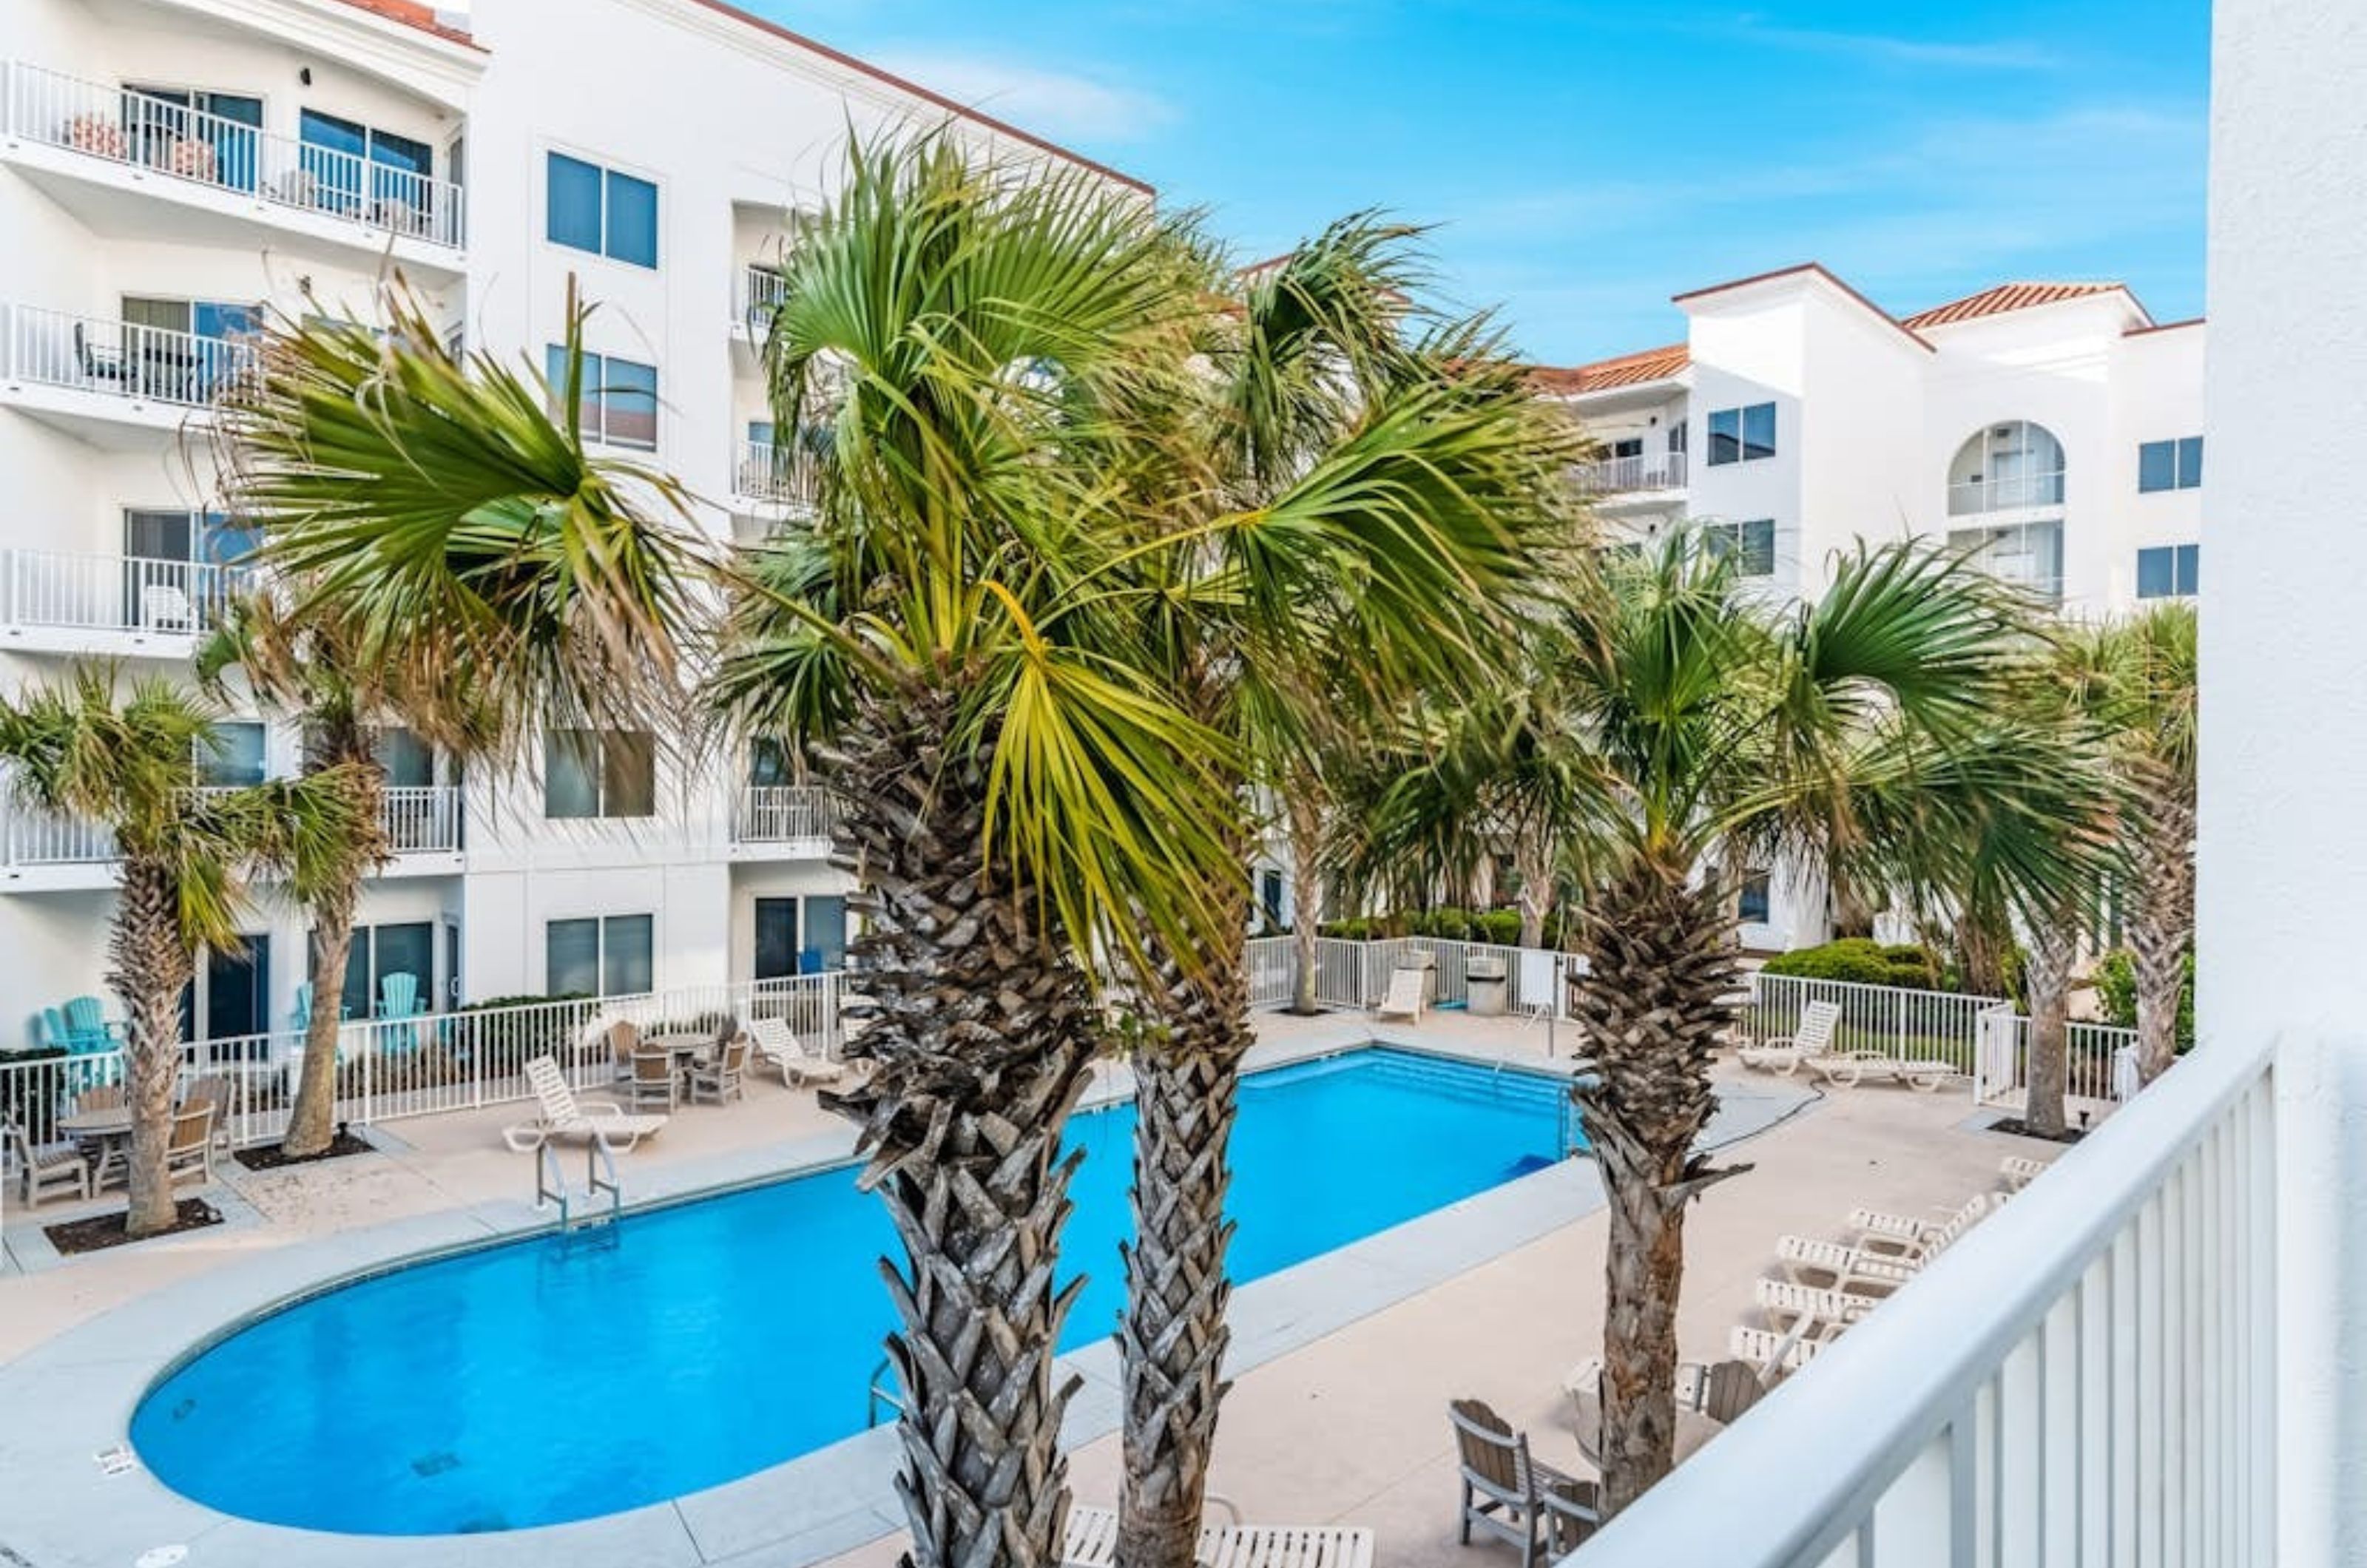 View from a balcony of the courtyard with the outdoor pool and trees at Palm Beach Condos 